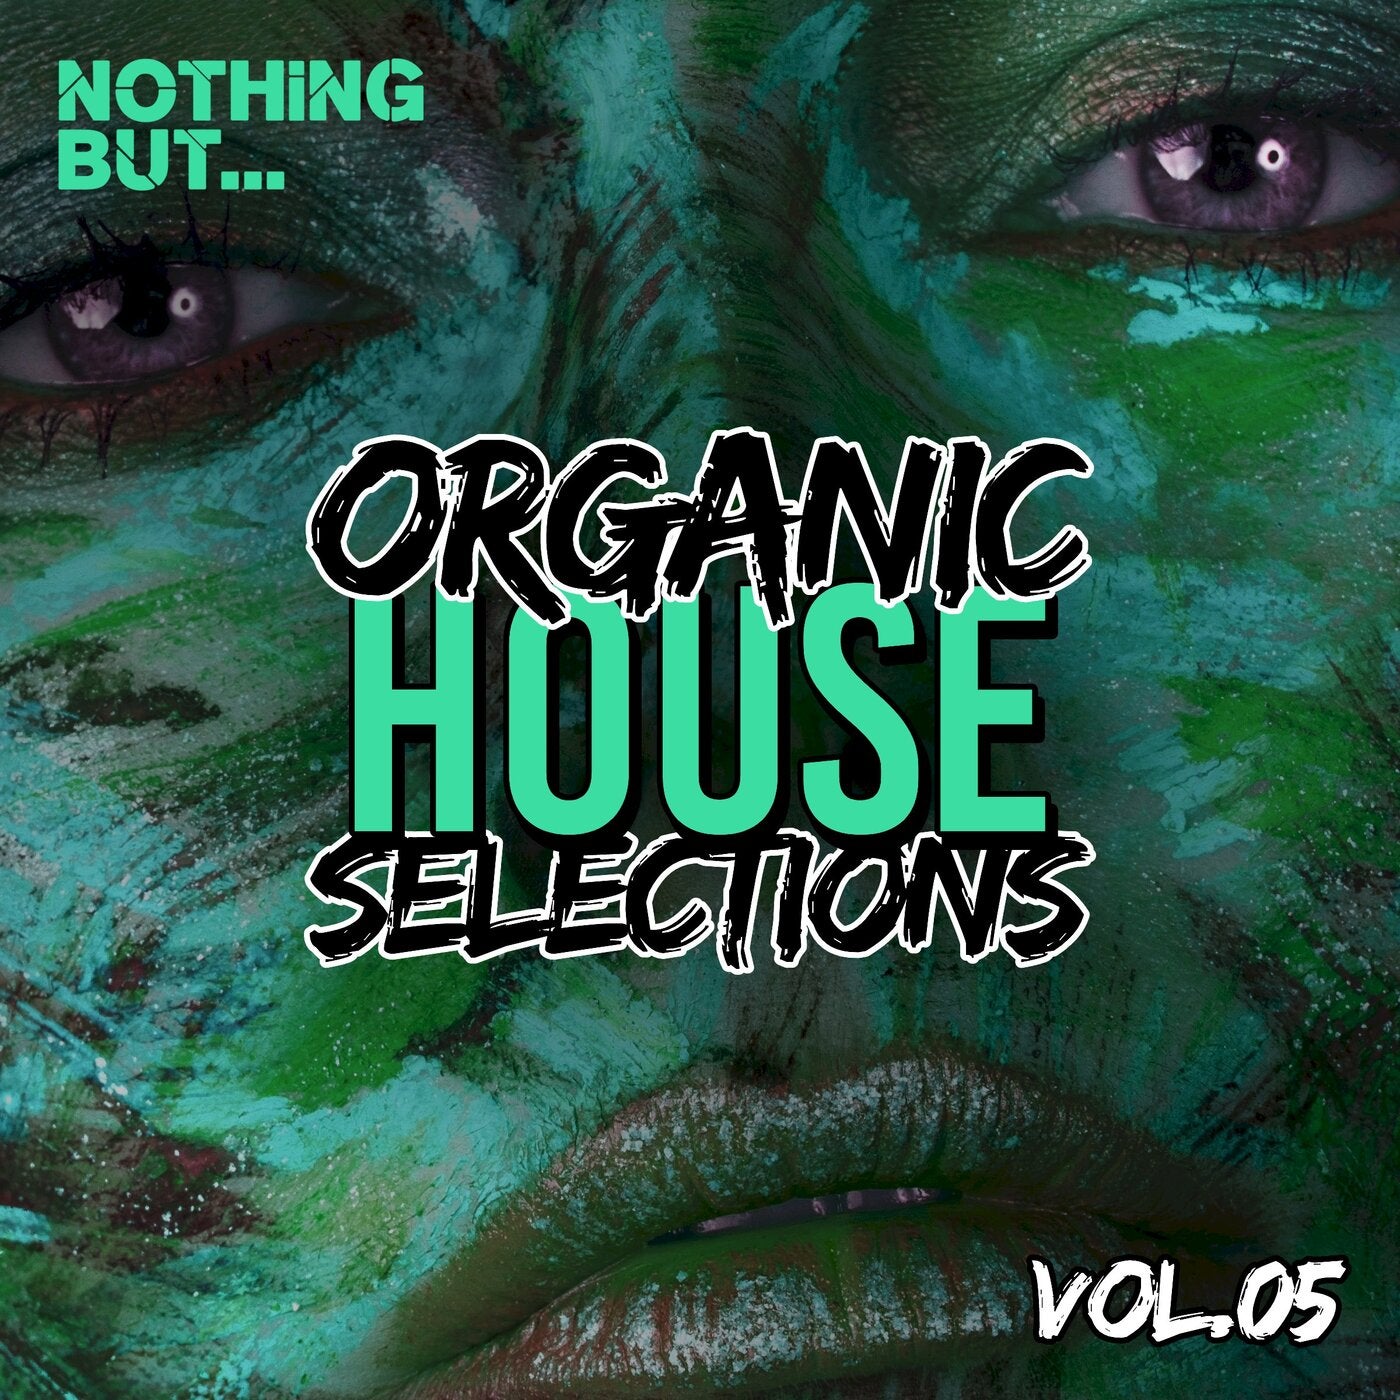 VA – Nothing But… Organic House Selections, Vol. 05 [NBOHS05]